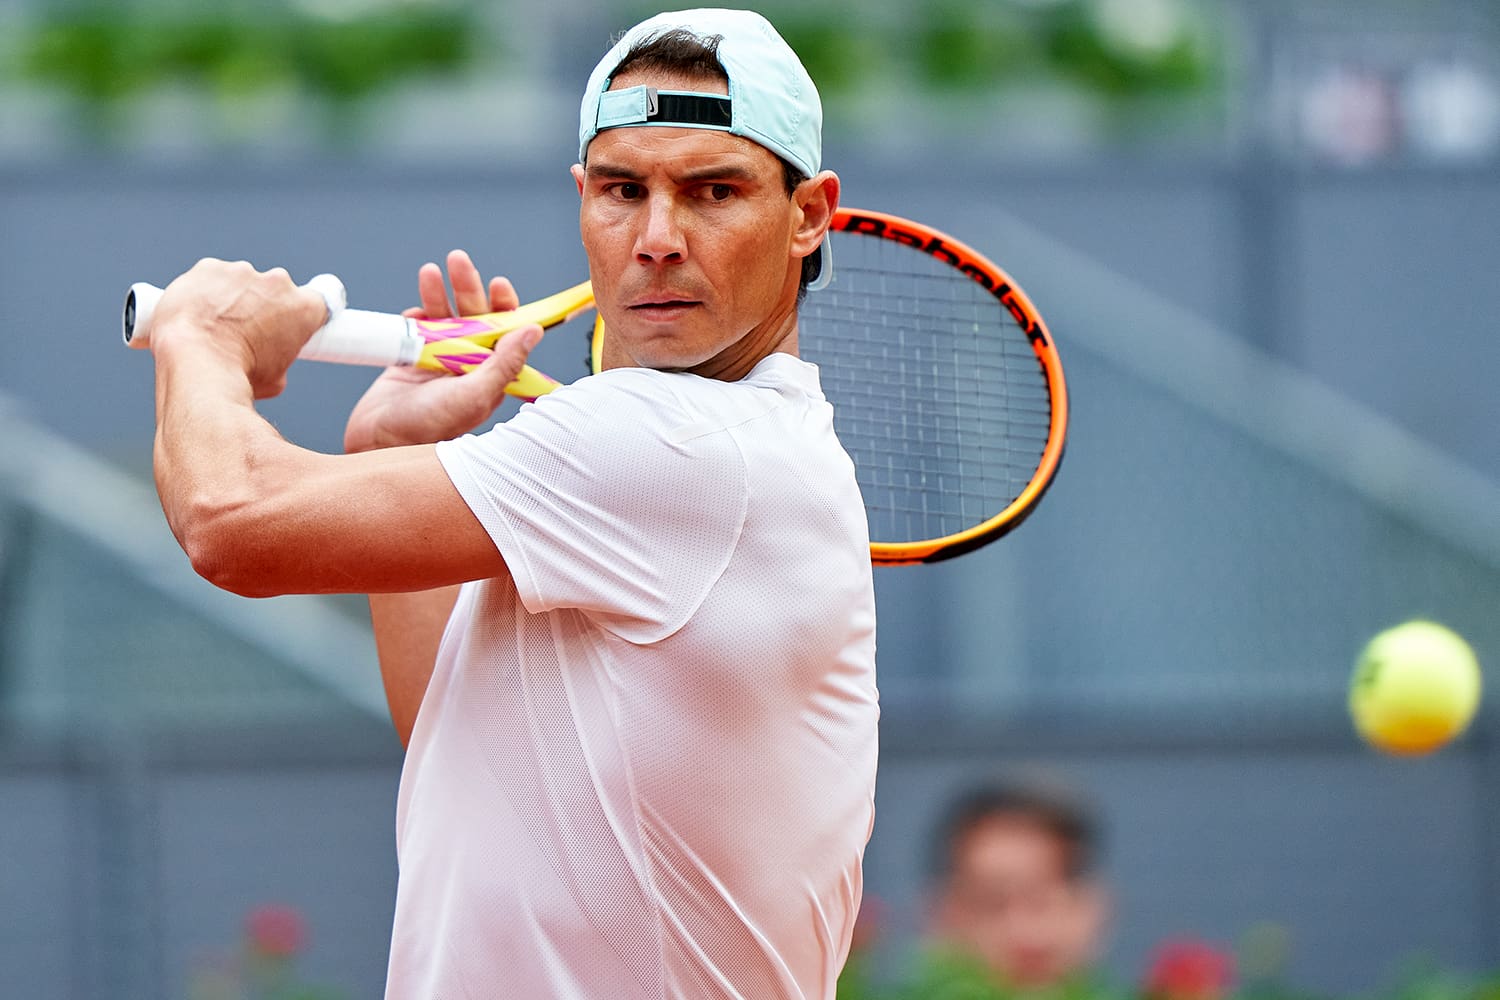 tennis-legend-rafael-nadal-confirms-his-first-baby-is-on-the-way